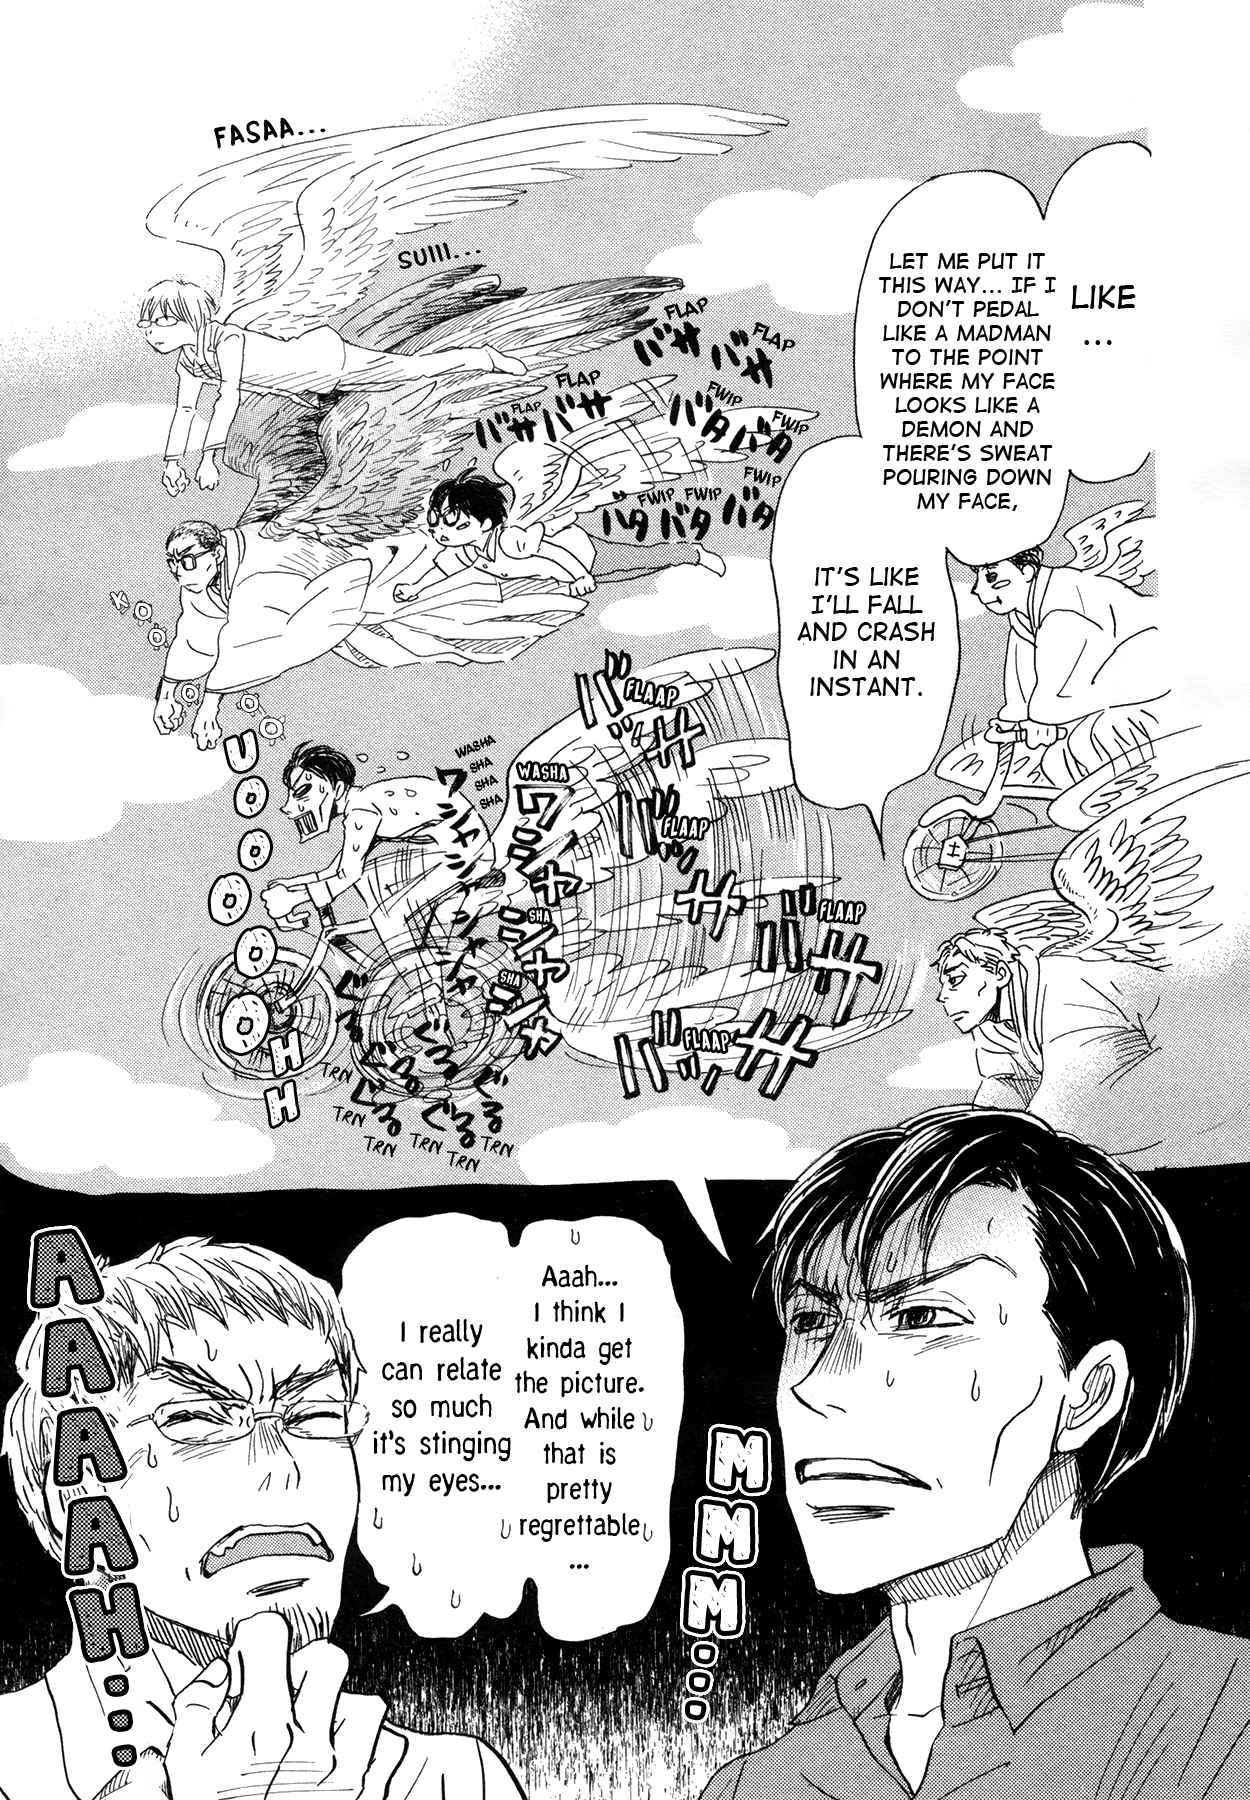 3 Gatsu no Lion Vol. 14 Ch. 145 By the Side of the Red Bridge (3)